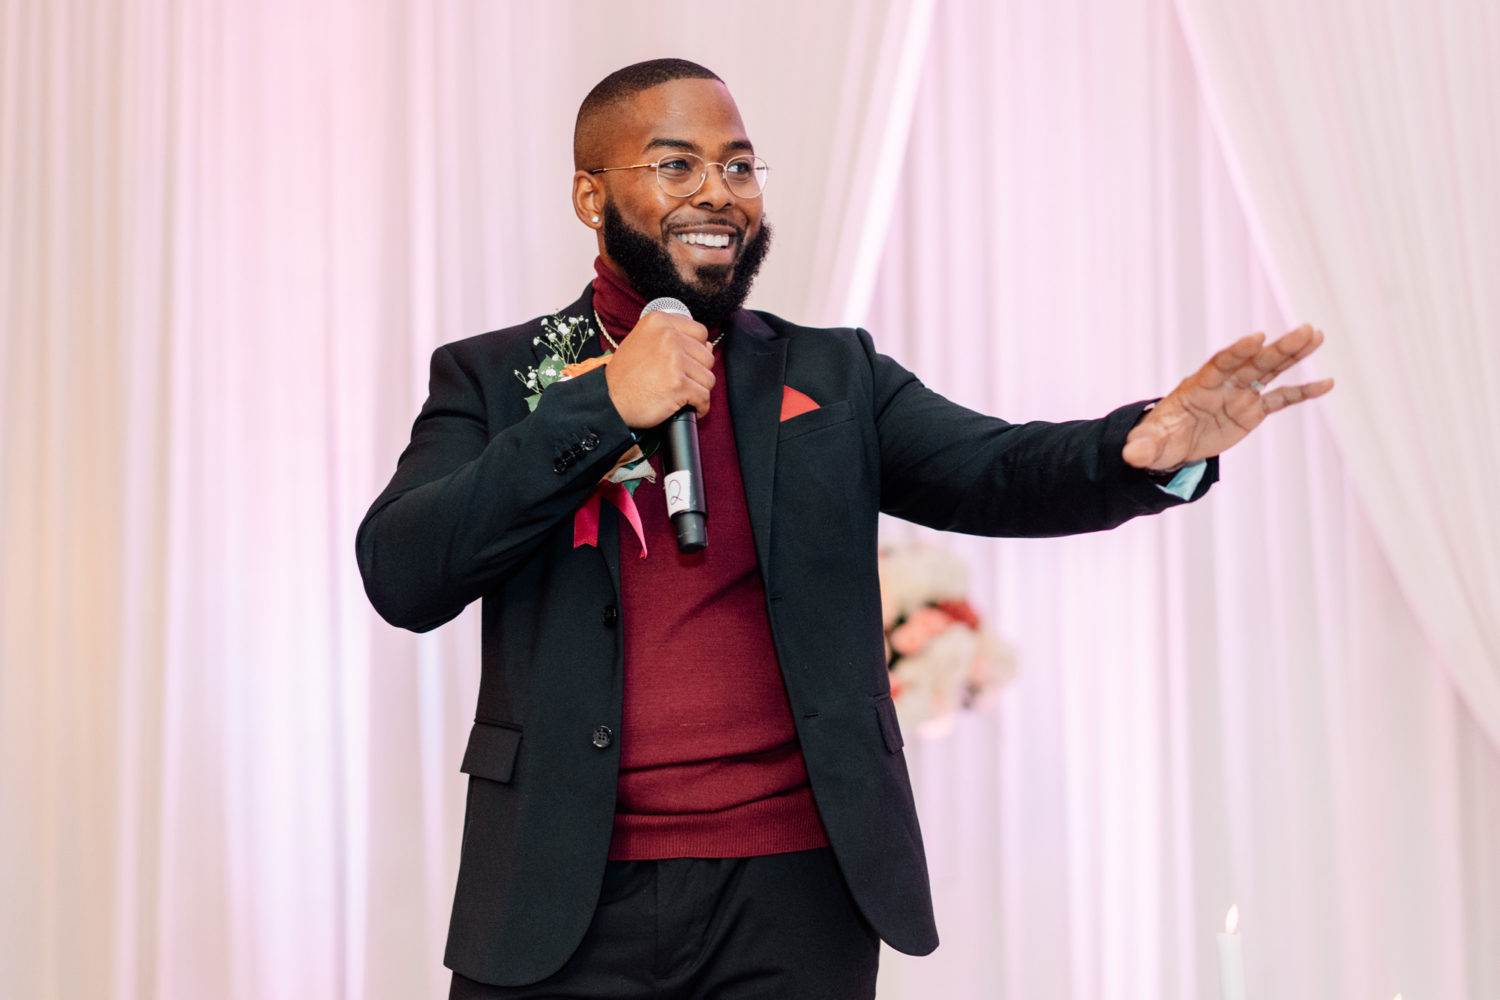 groom having fun and smiling while giving a speech on his Foxchase manor wedding day